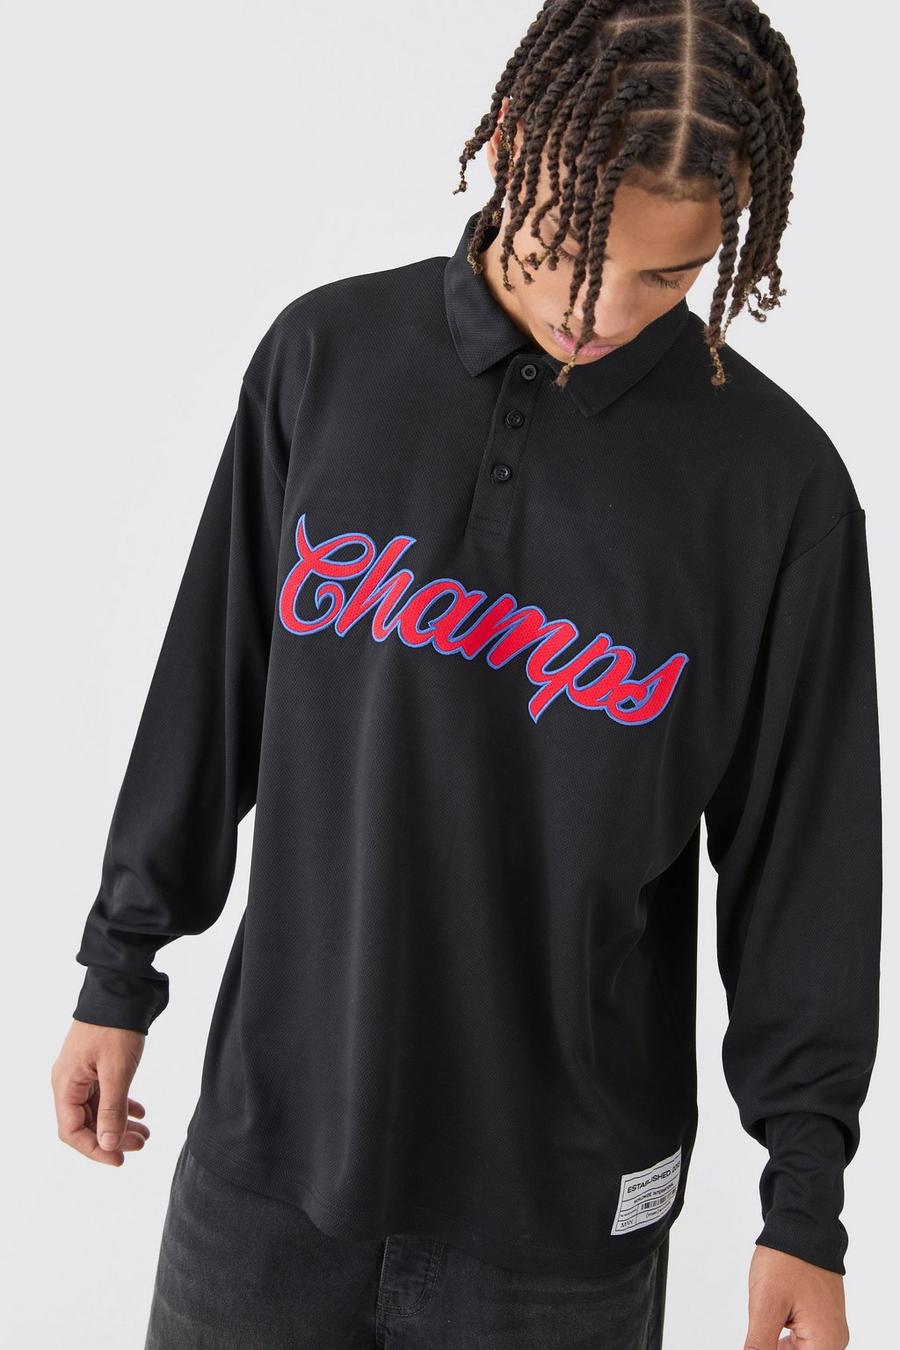 Black Oversized Mesh Champs Varsity Rugby Polo